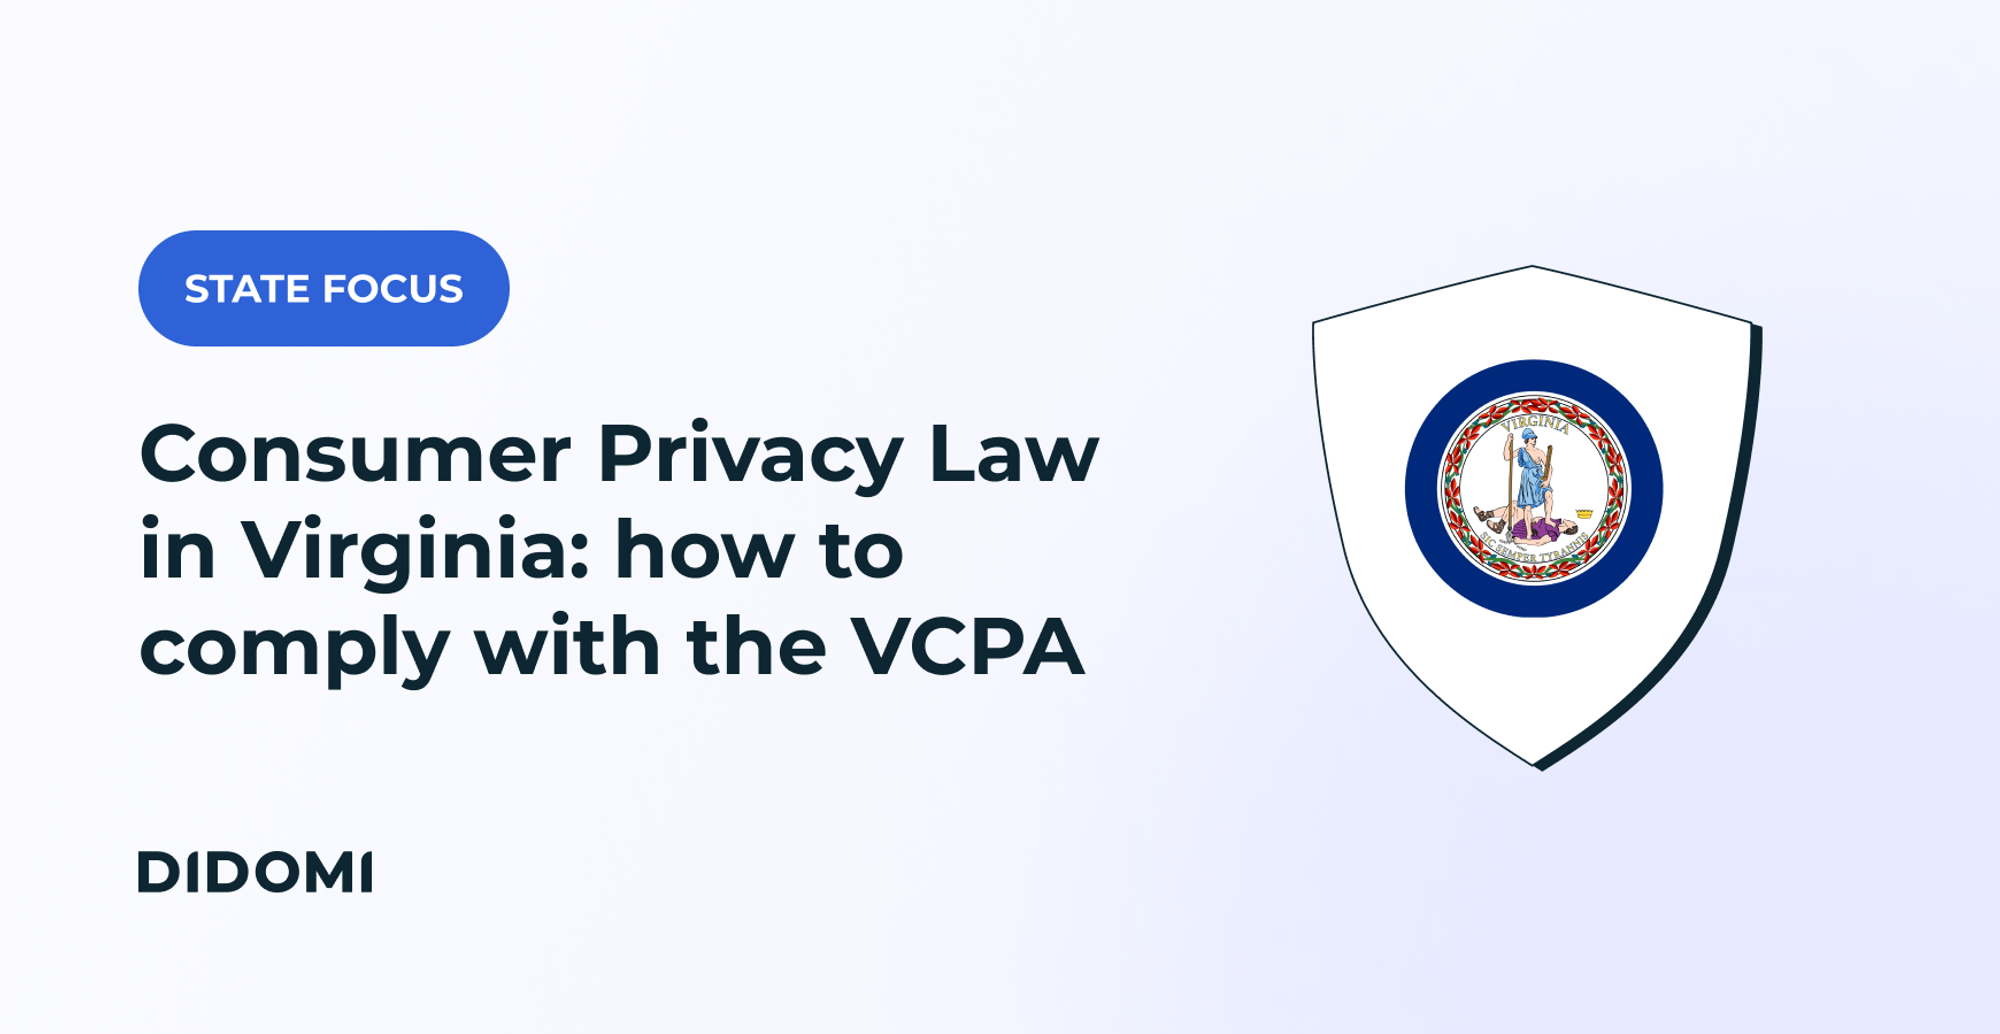 Didomi - The Virginia Consumer Data Protection Act (VCDPA) is now in effect: what should you do to comply?